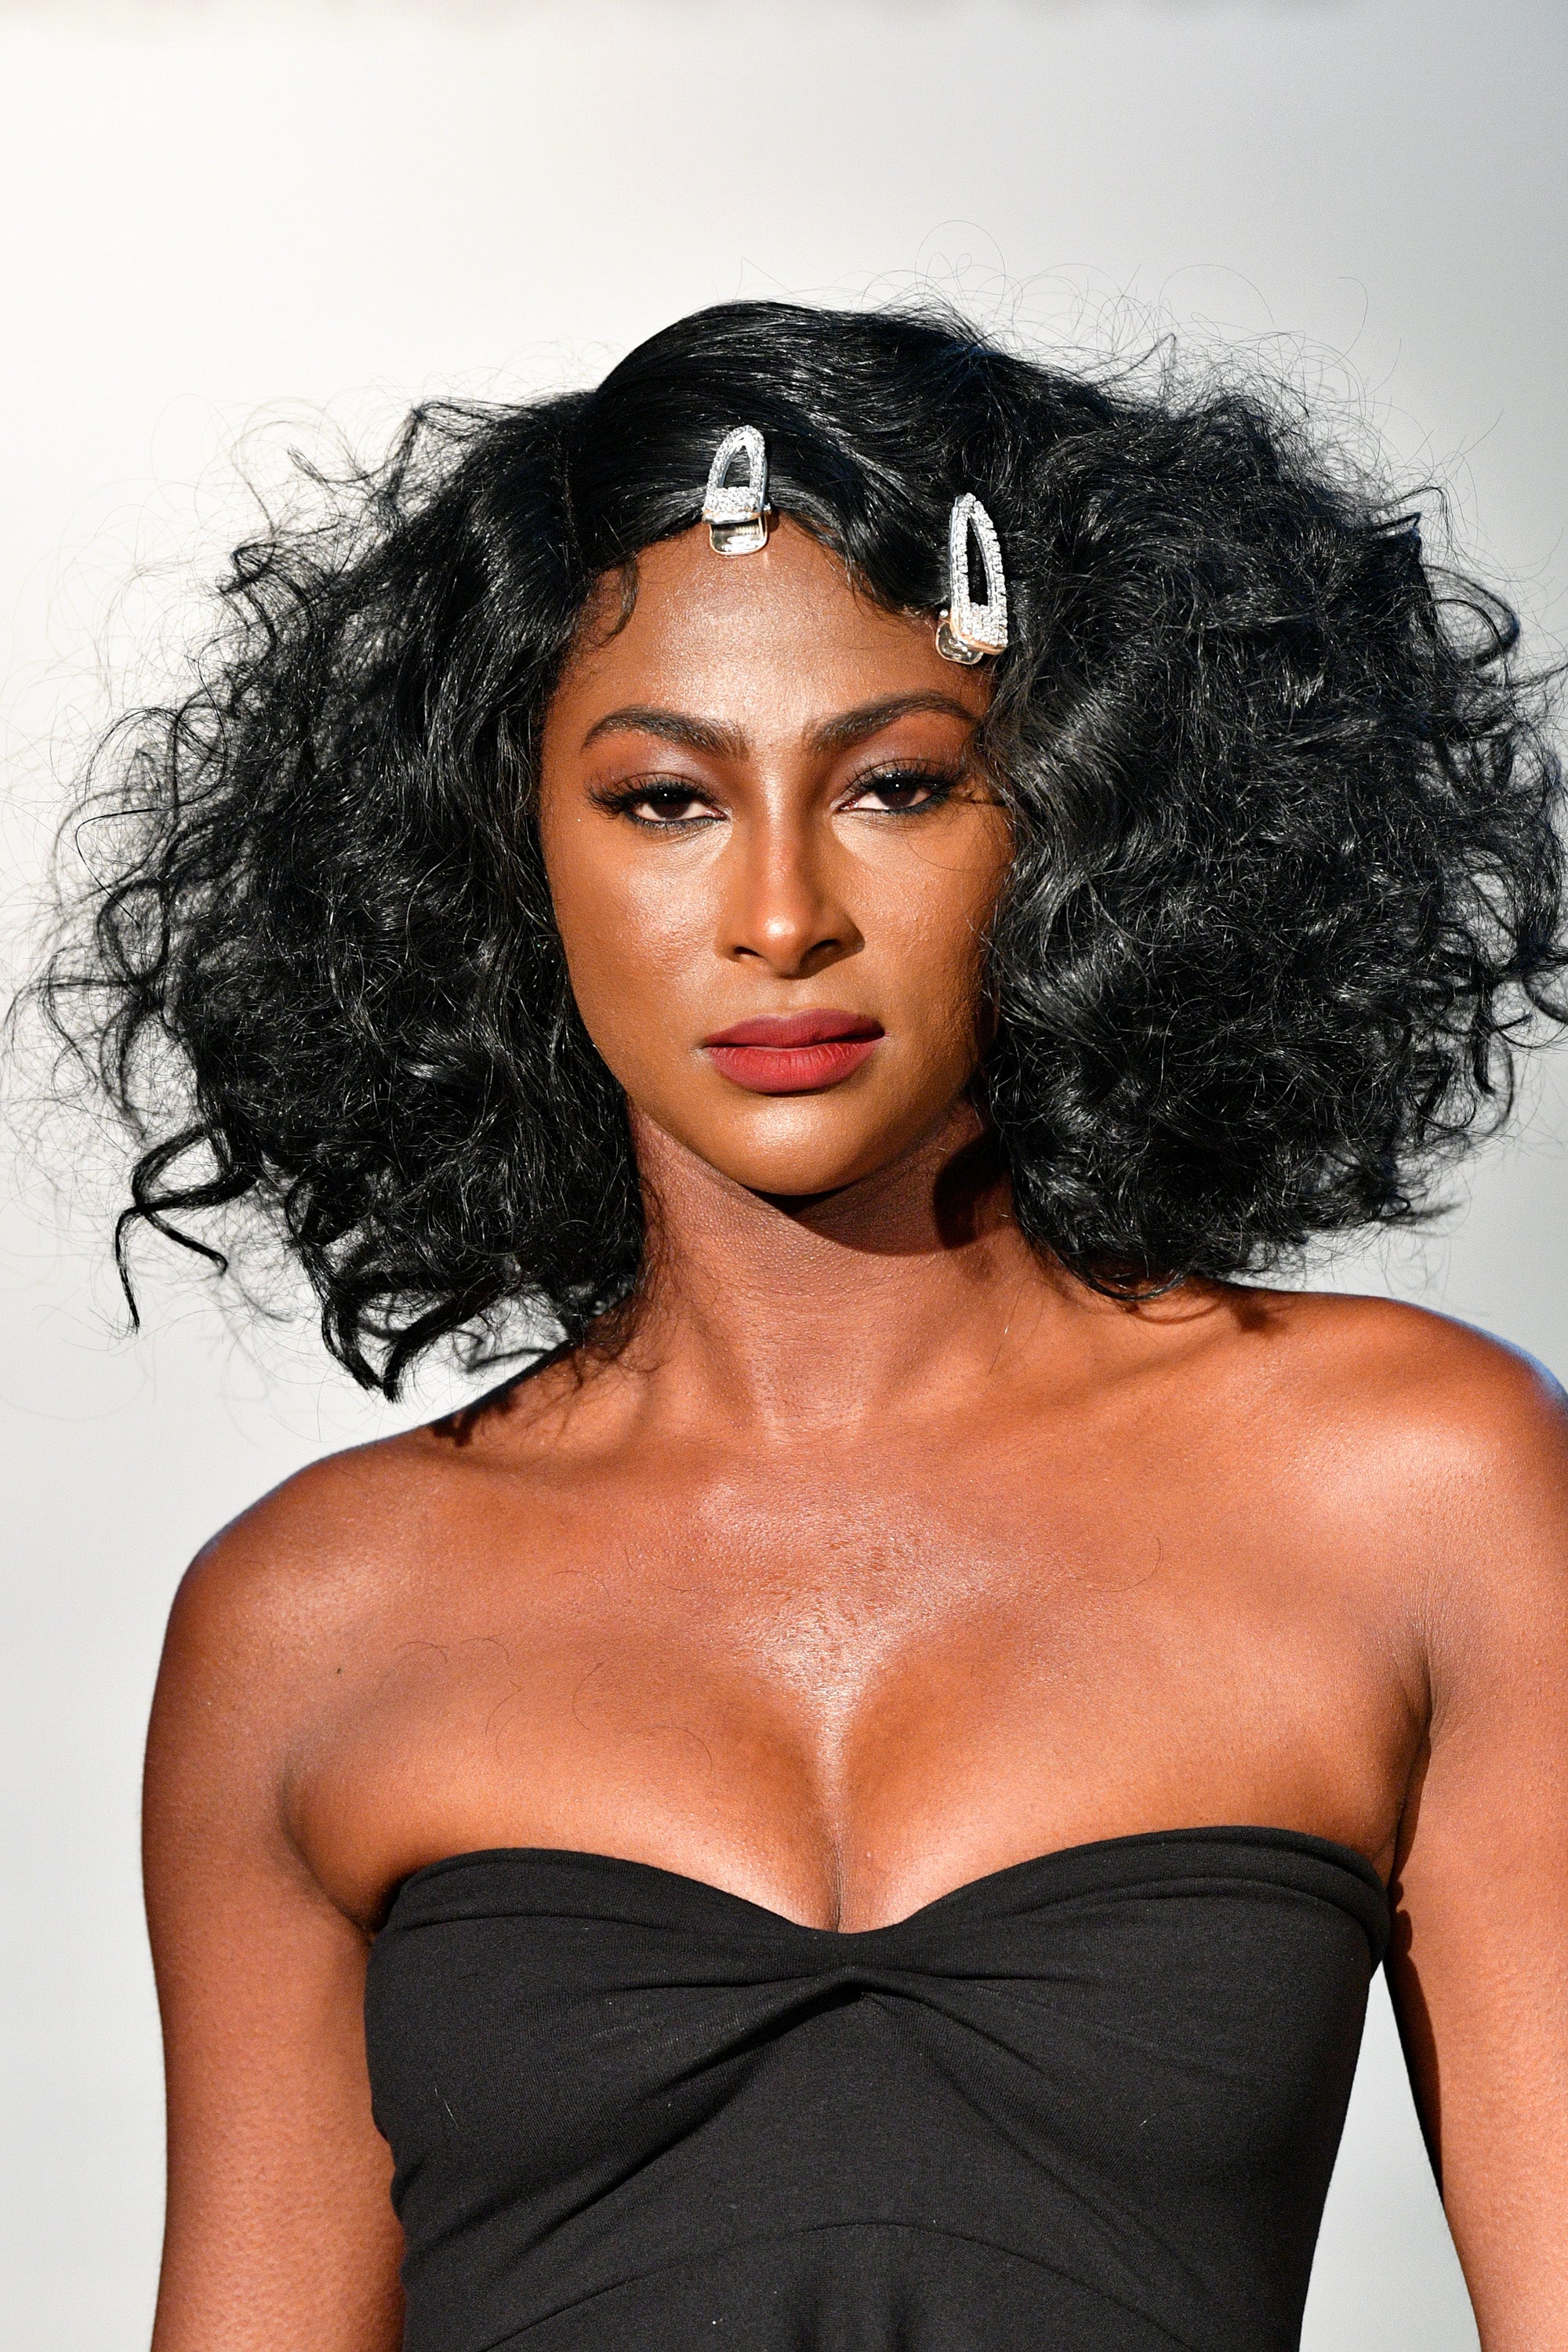 All The Gorgeous Hair Looks From ESSENCE X Naturally Curly’s ‘Texture On The Runway’